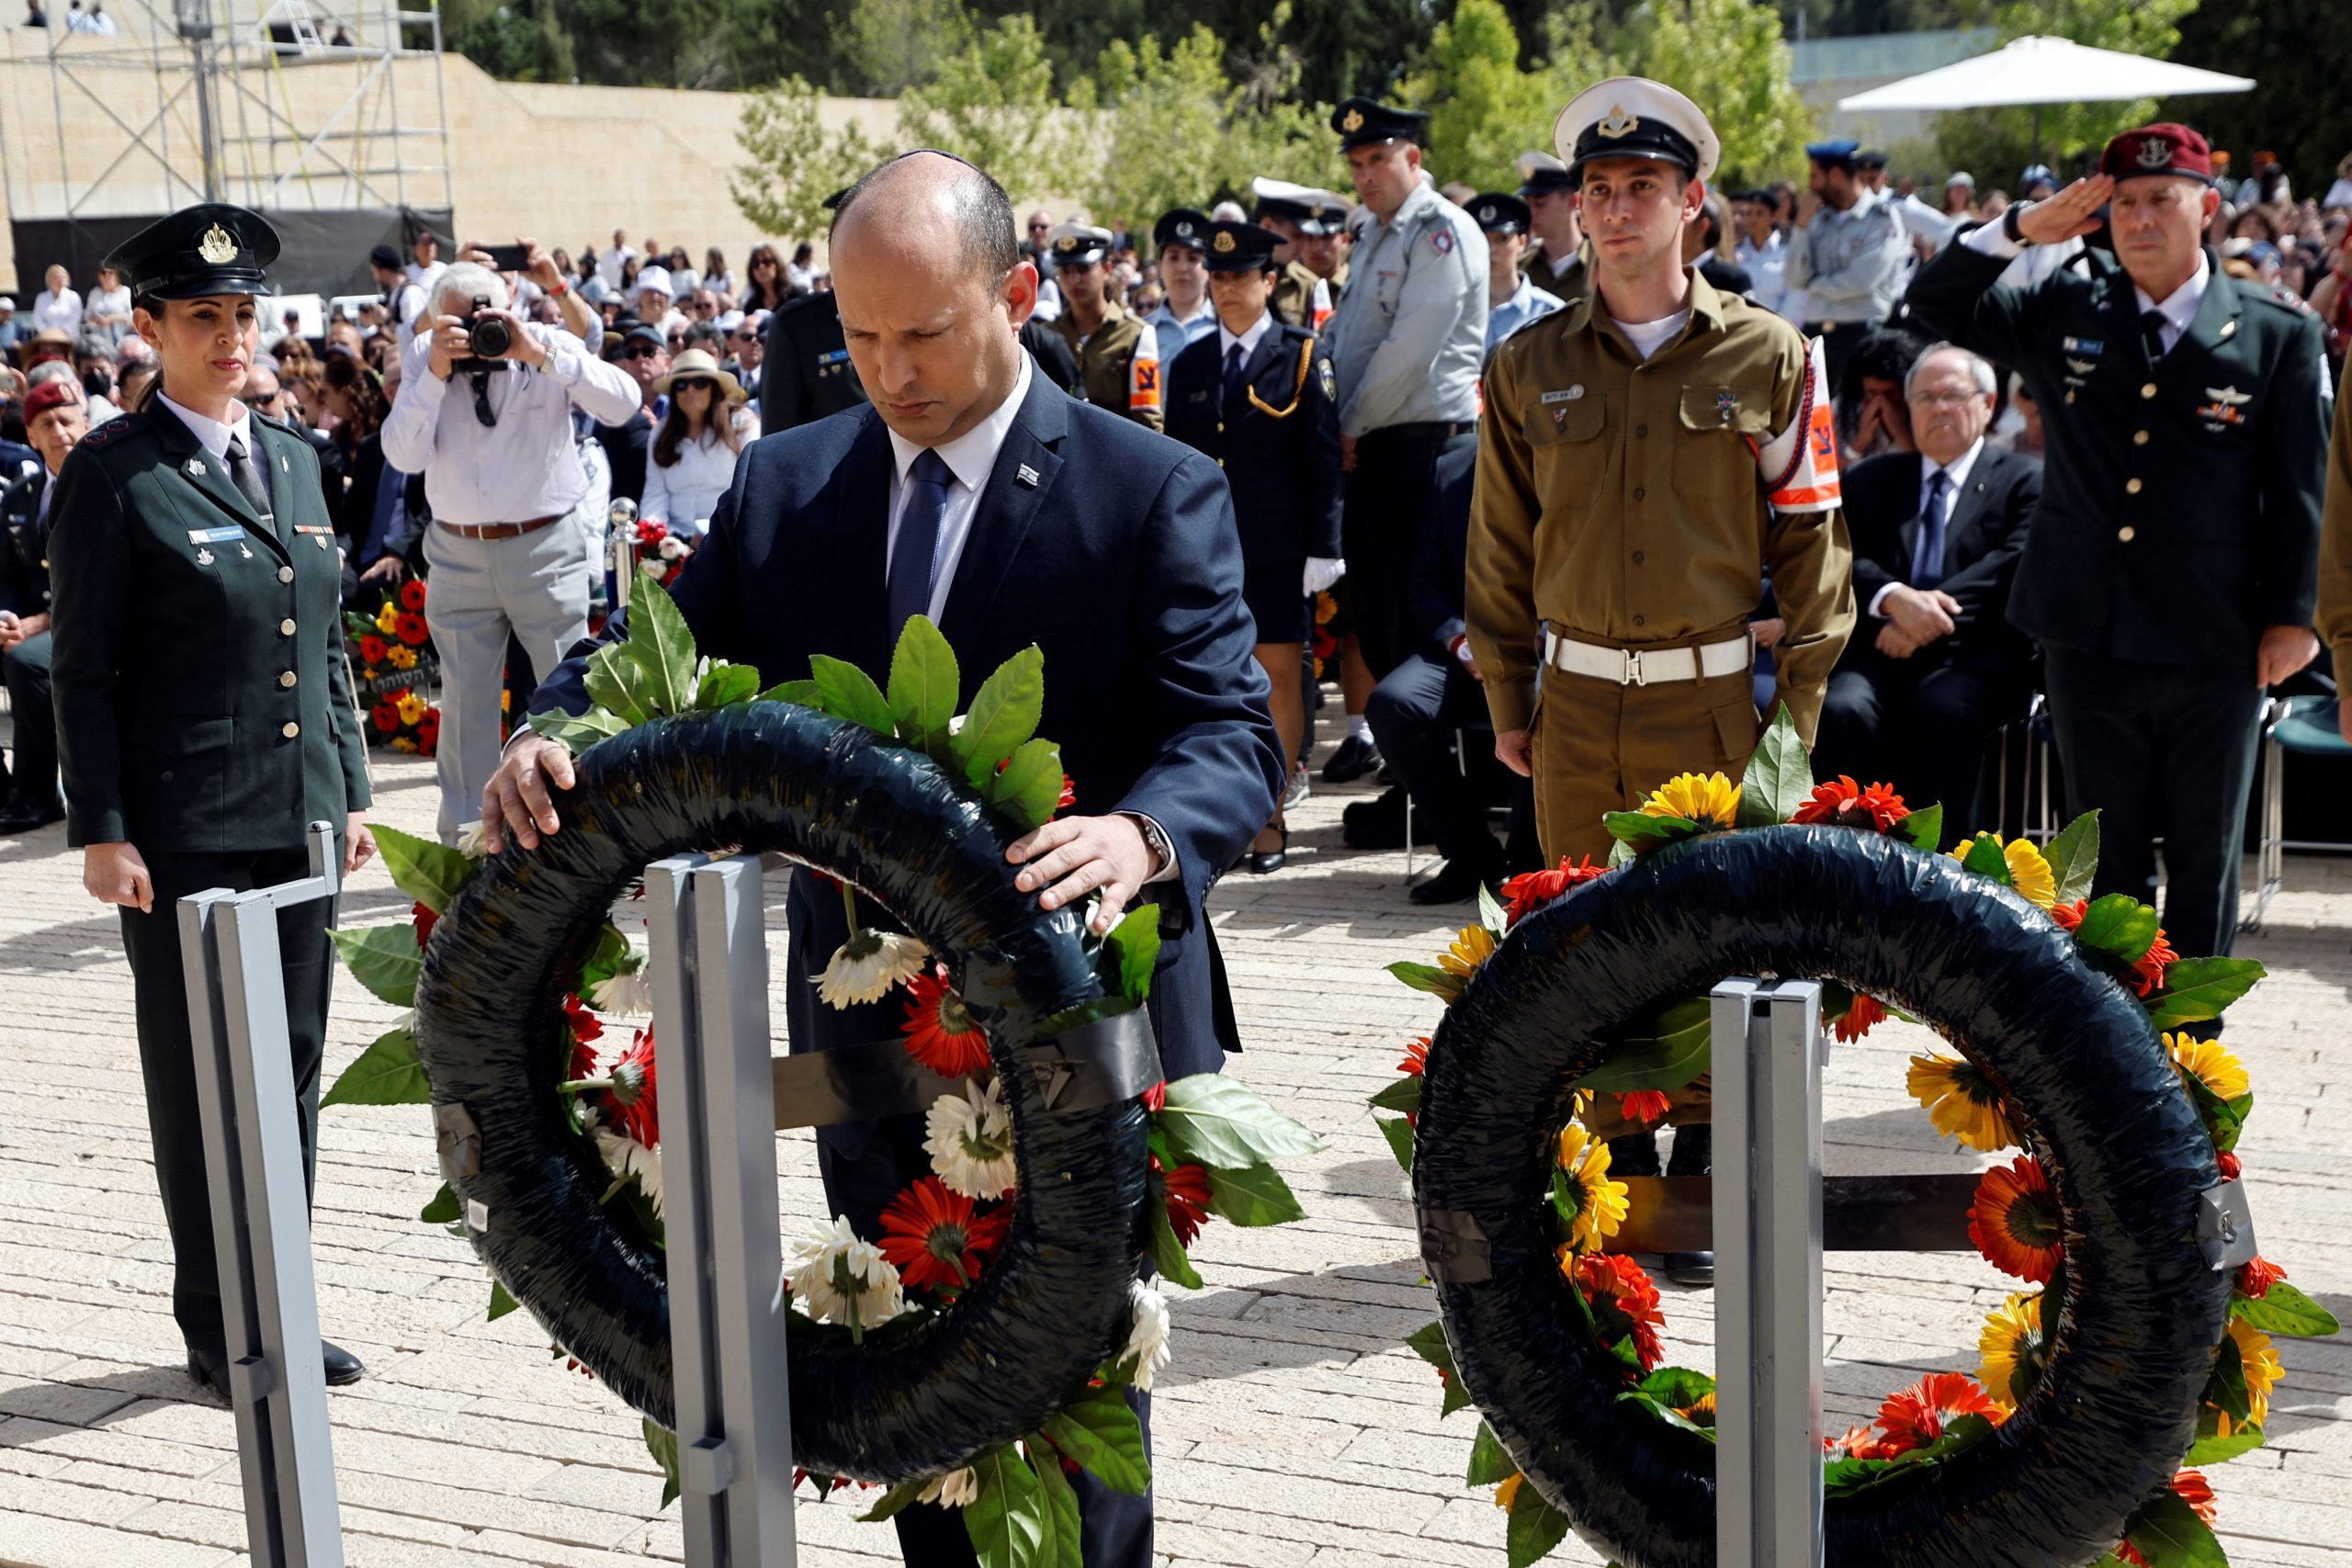 The Israeli Prime Minister gave a speech commemorating the Holocaust without mentioning Iran.  It signals a new approach.